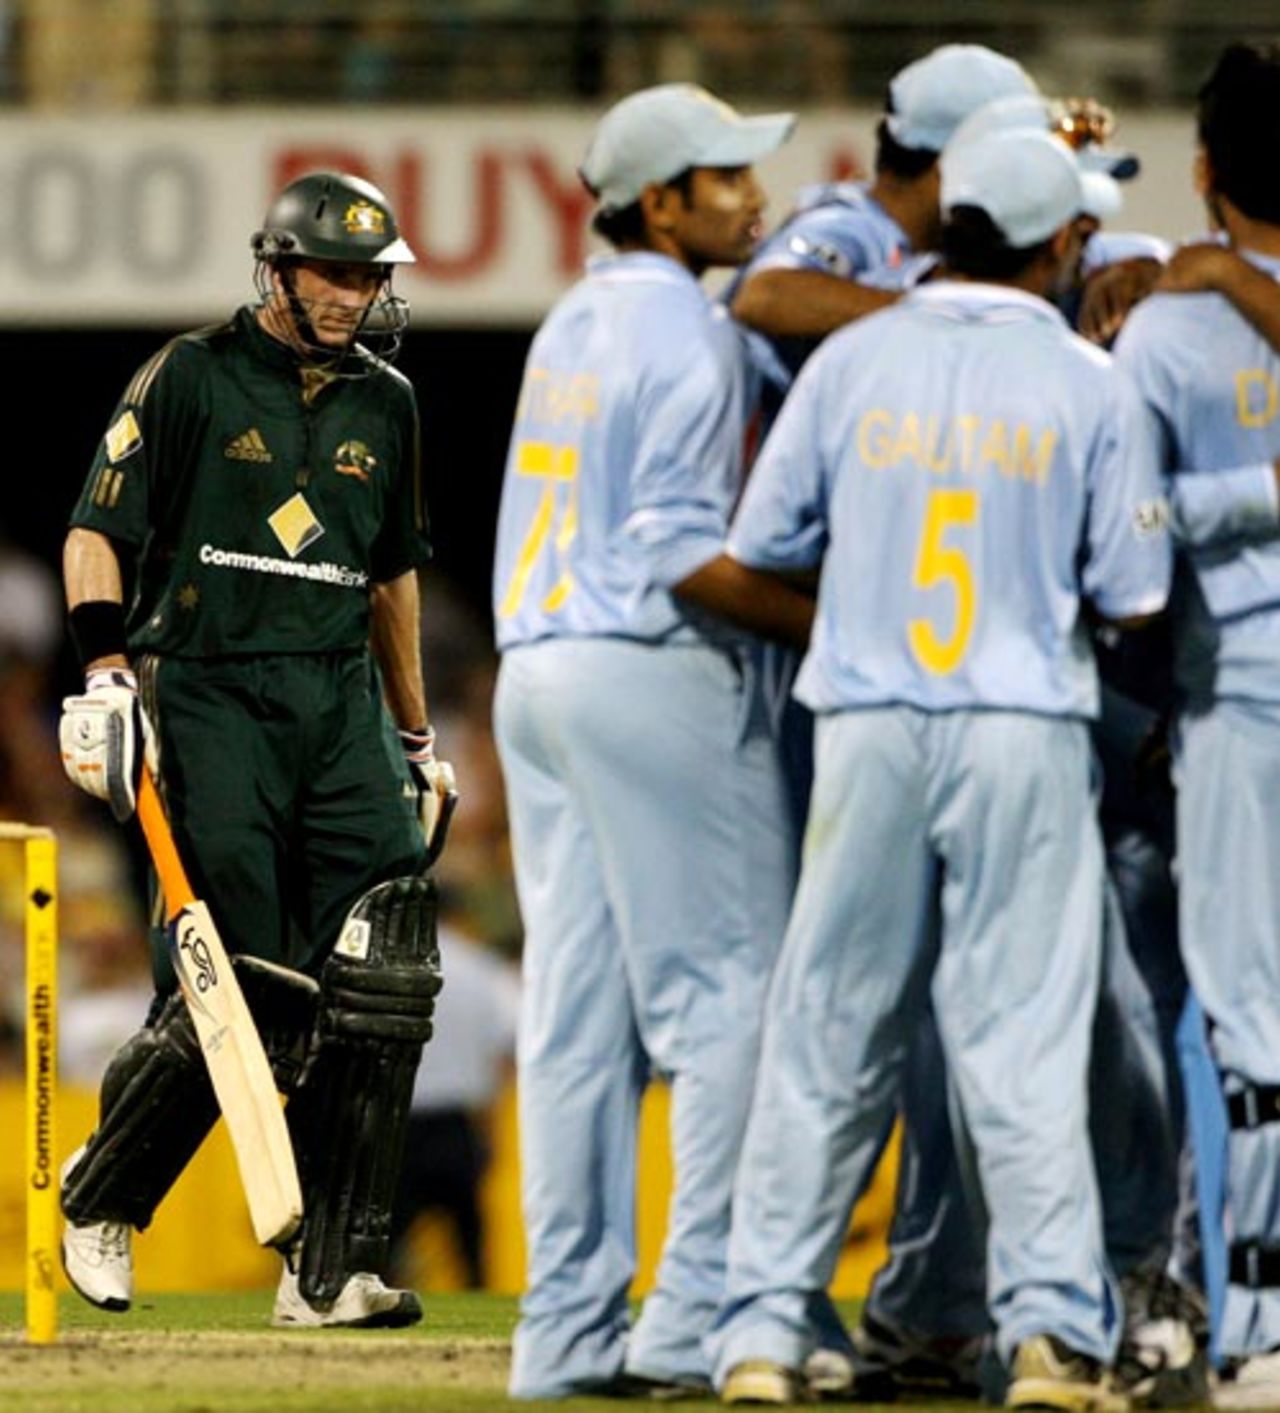 Michael Hussey departs after he was caught behind, Australia v India, CB Series, 2nd final, Brisbane, March 4, 2008 